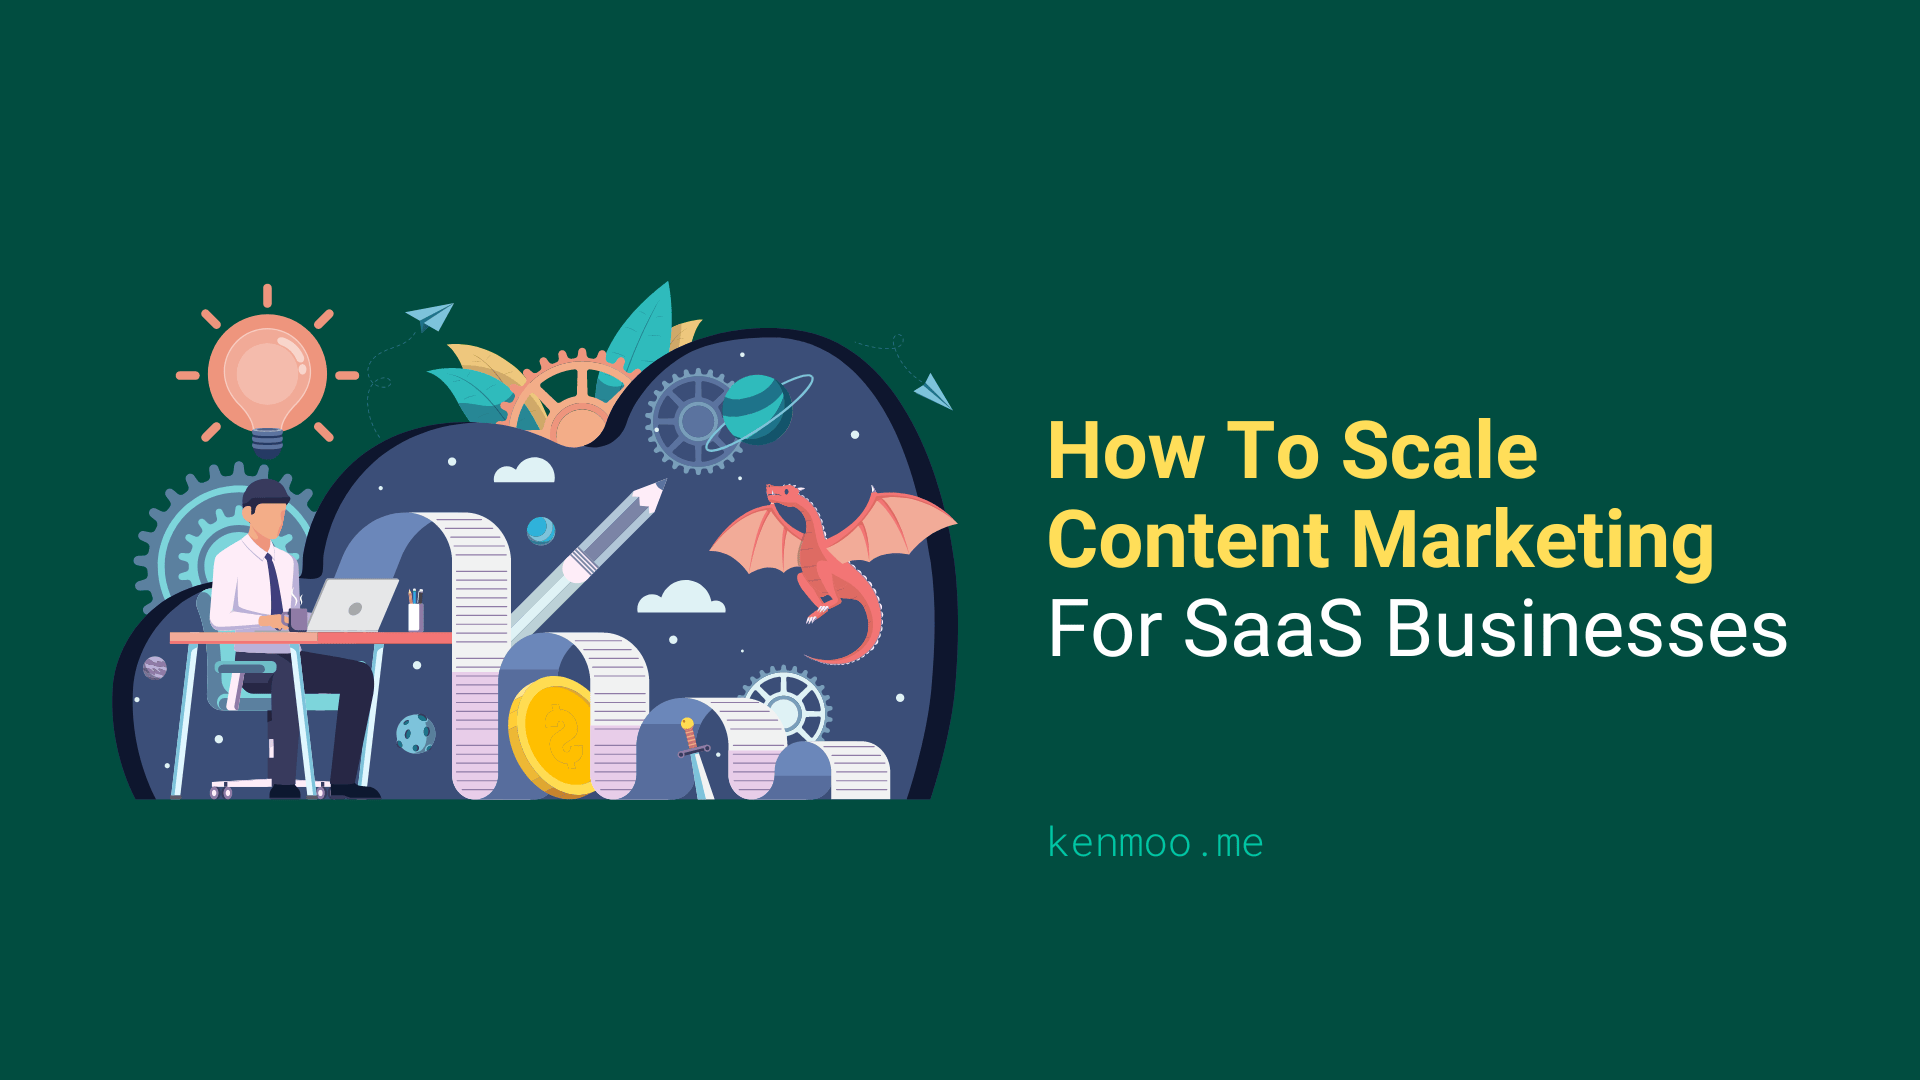 How To Scale Content Marketing For SaaS Businesses